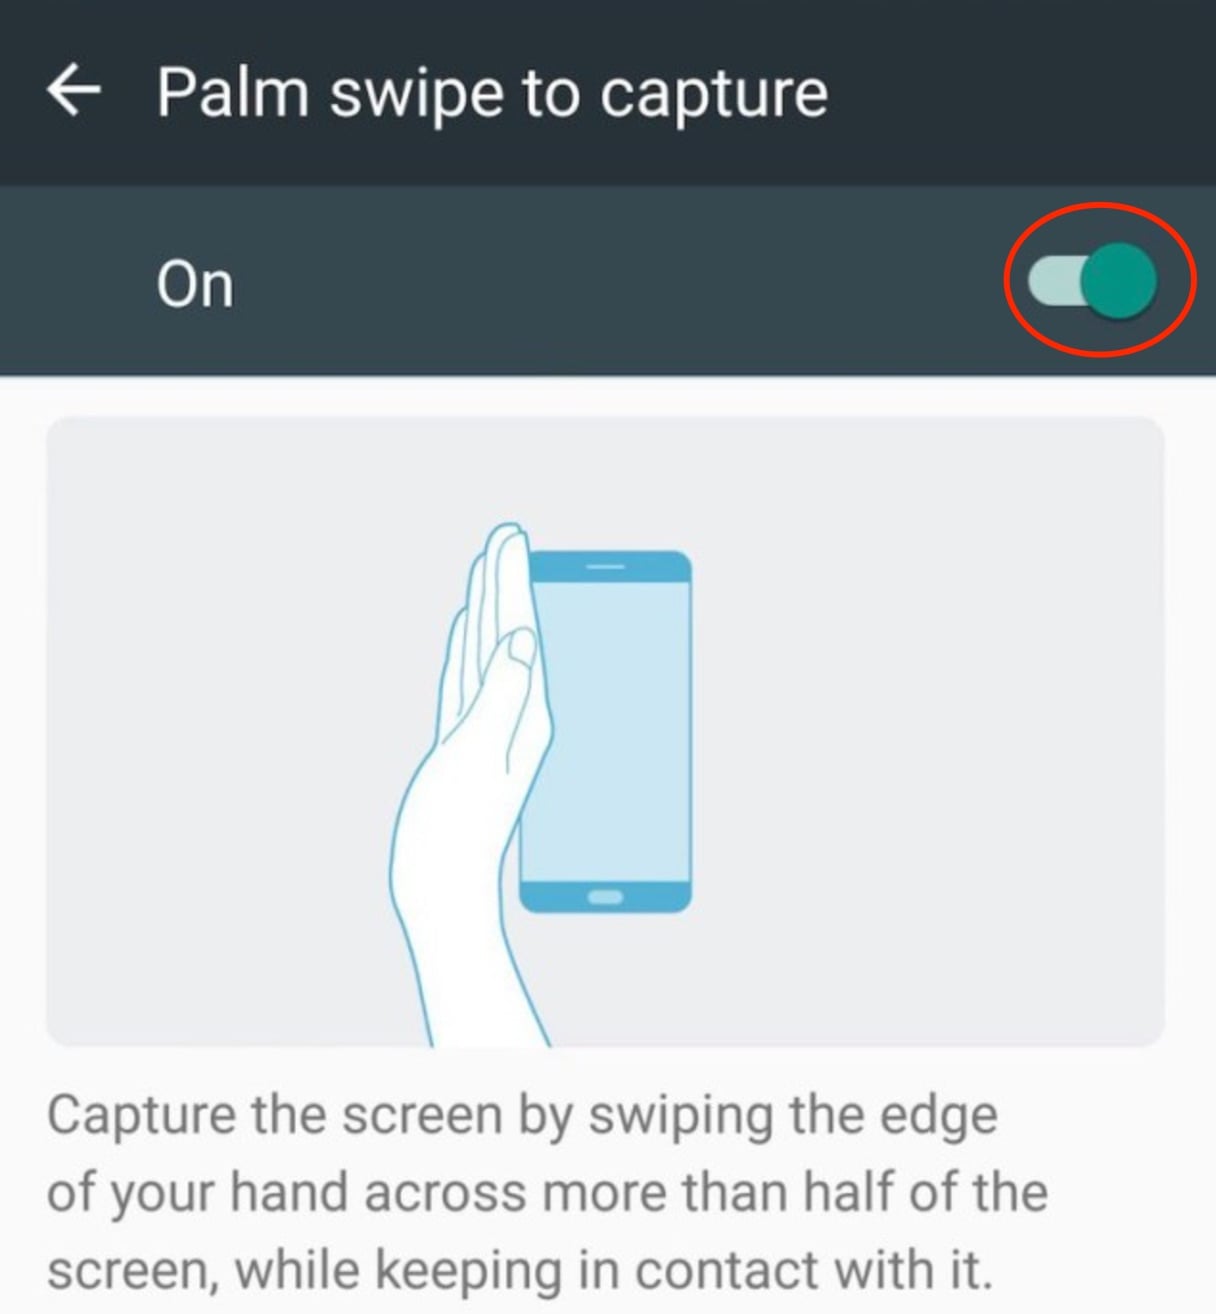 how to take screenshot on galaxy note 8